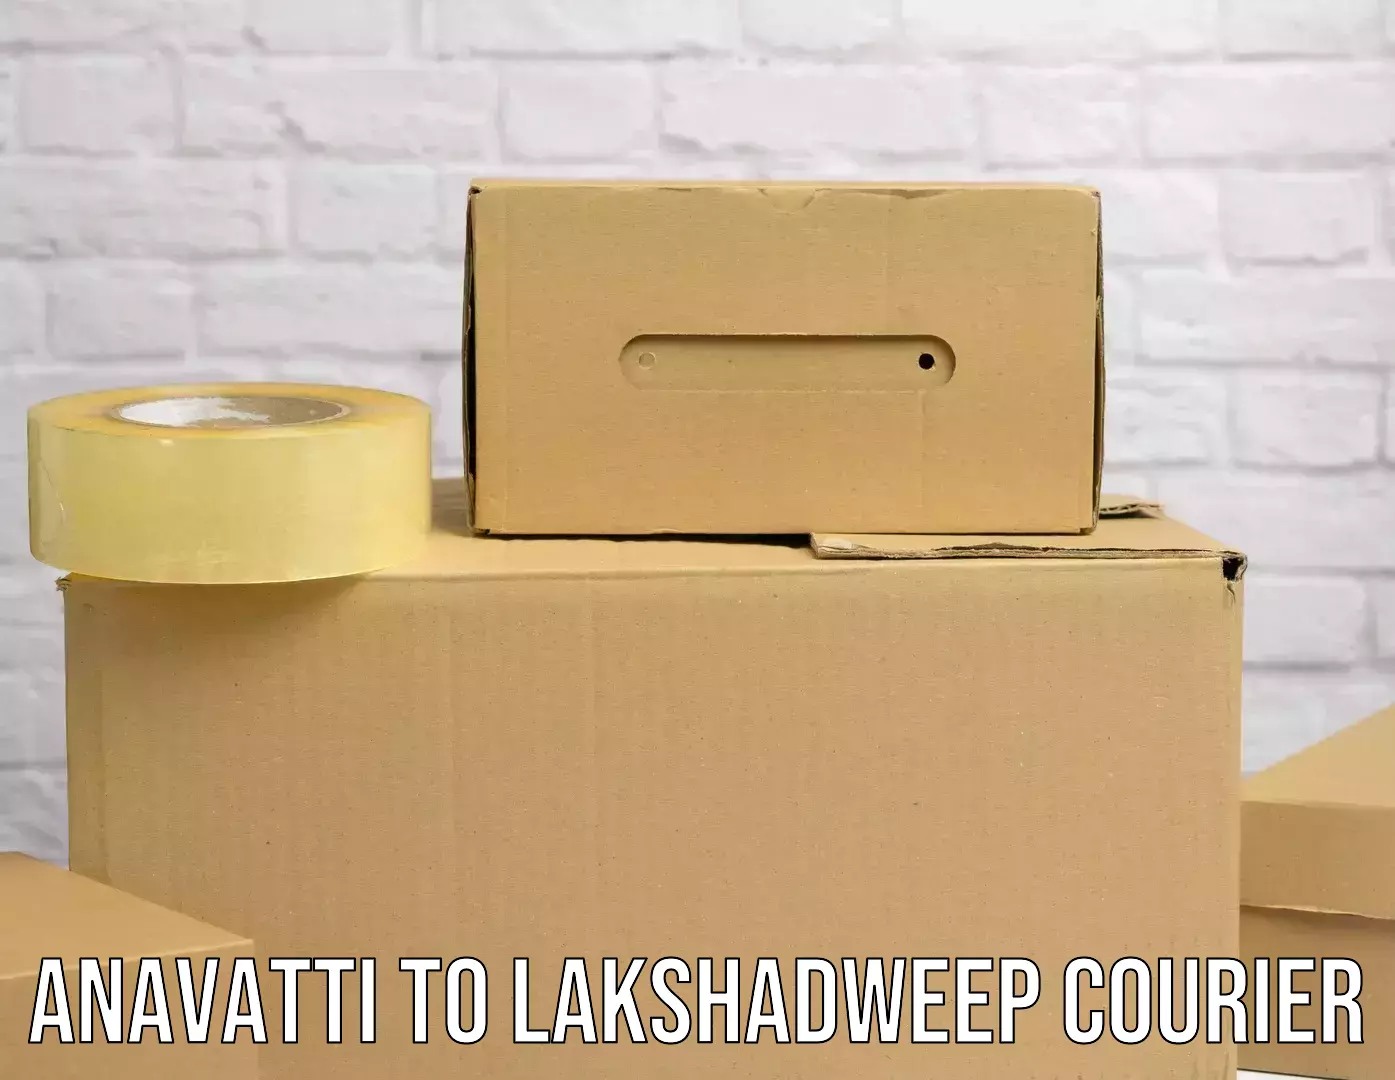 Online package tracking in Anavatti to Lakshadweep